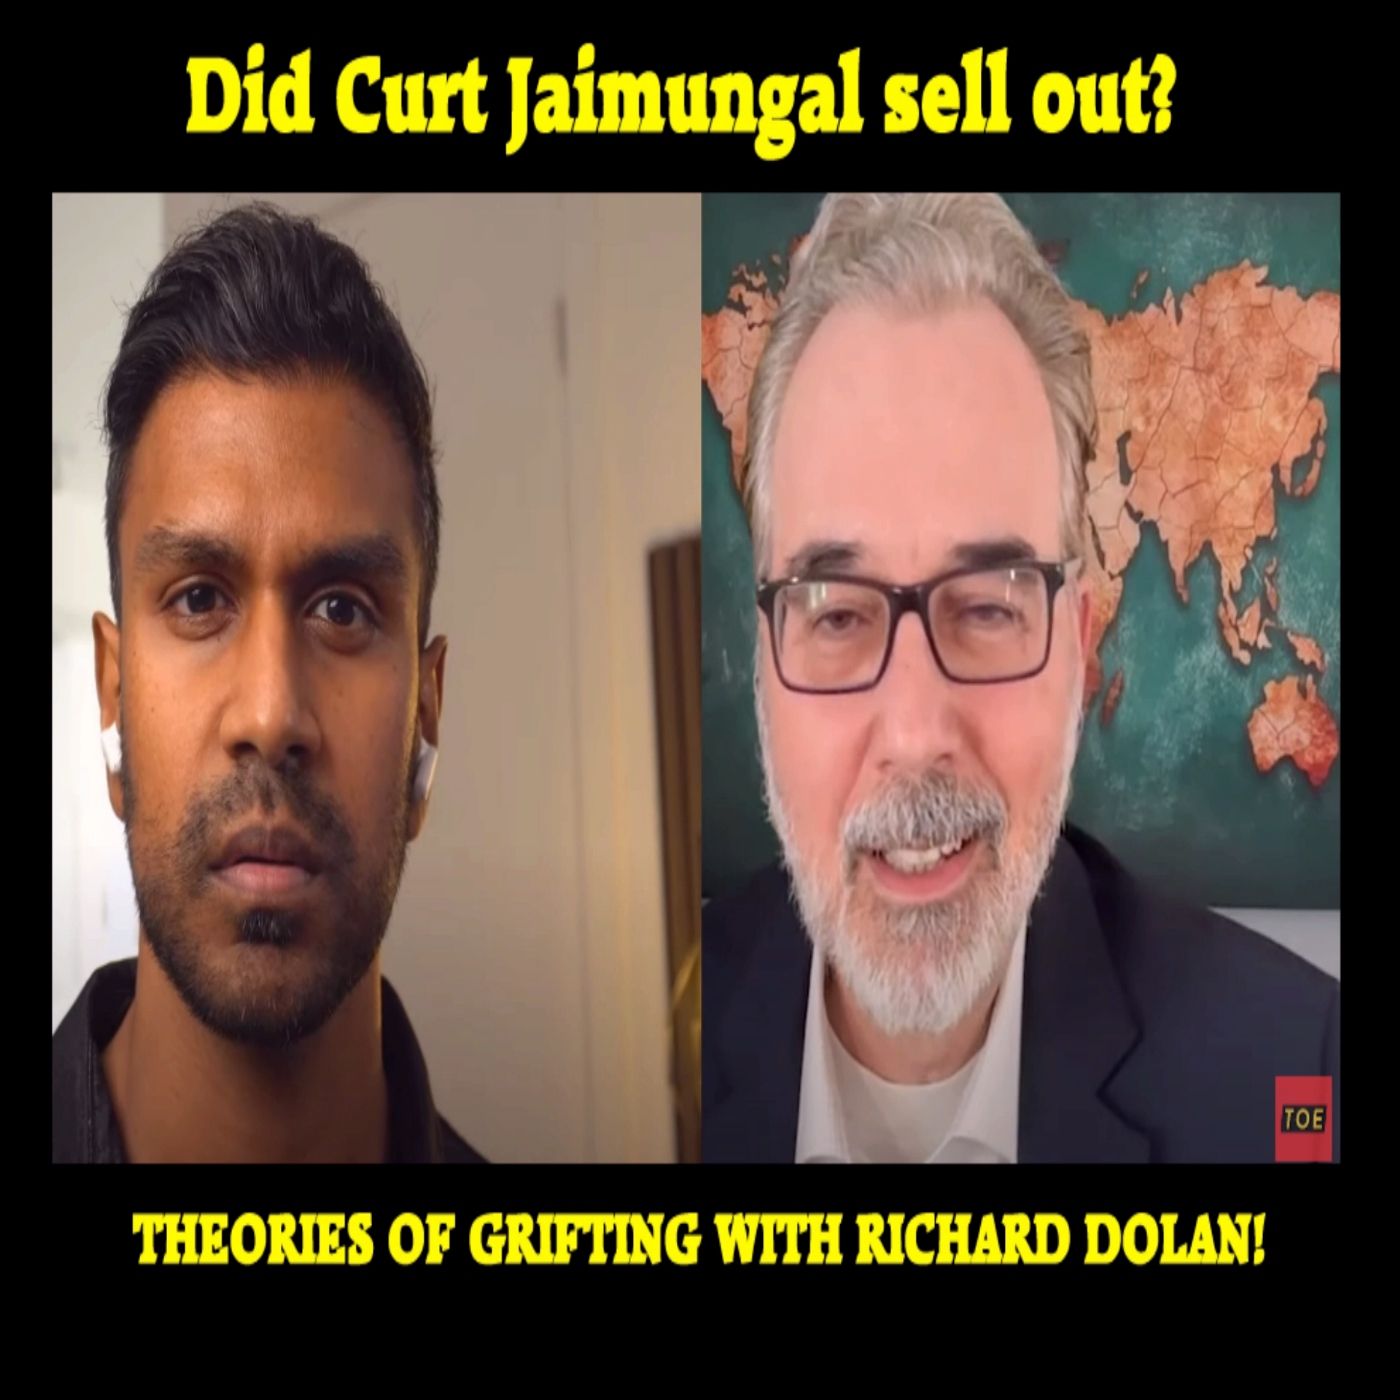 Did Curt Jaimungal sell out? Theories of GRIFTING with Richard Dolan!